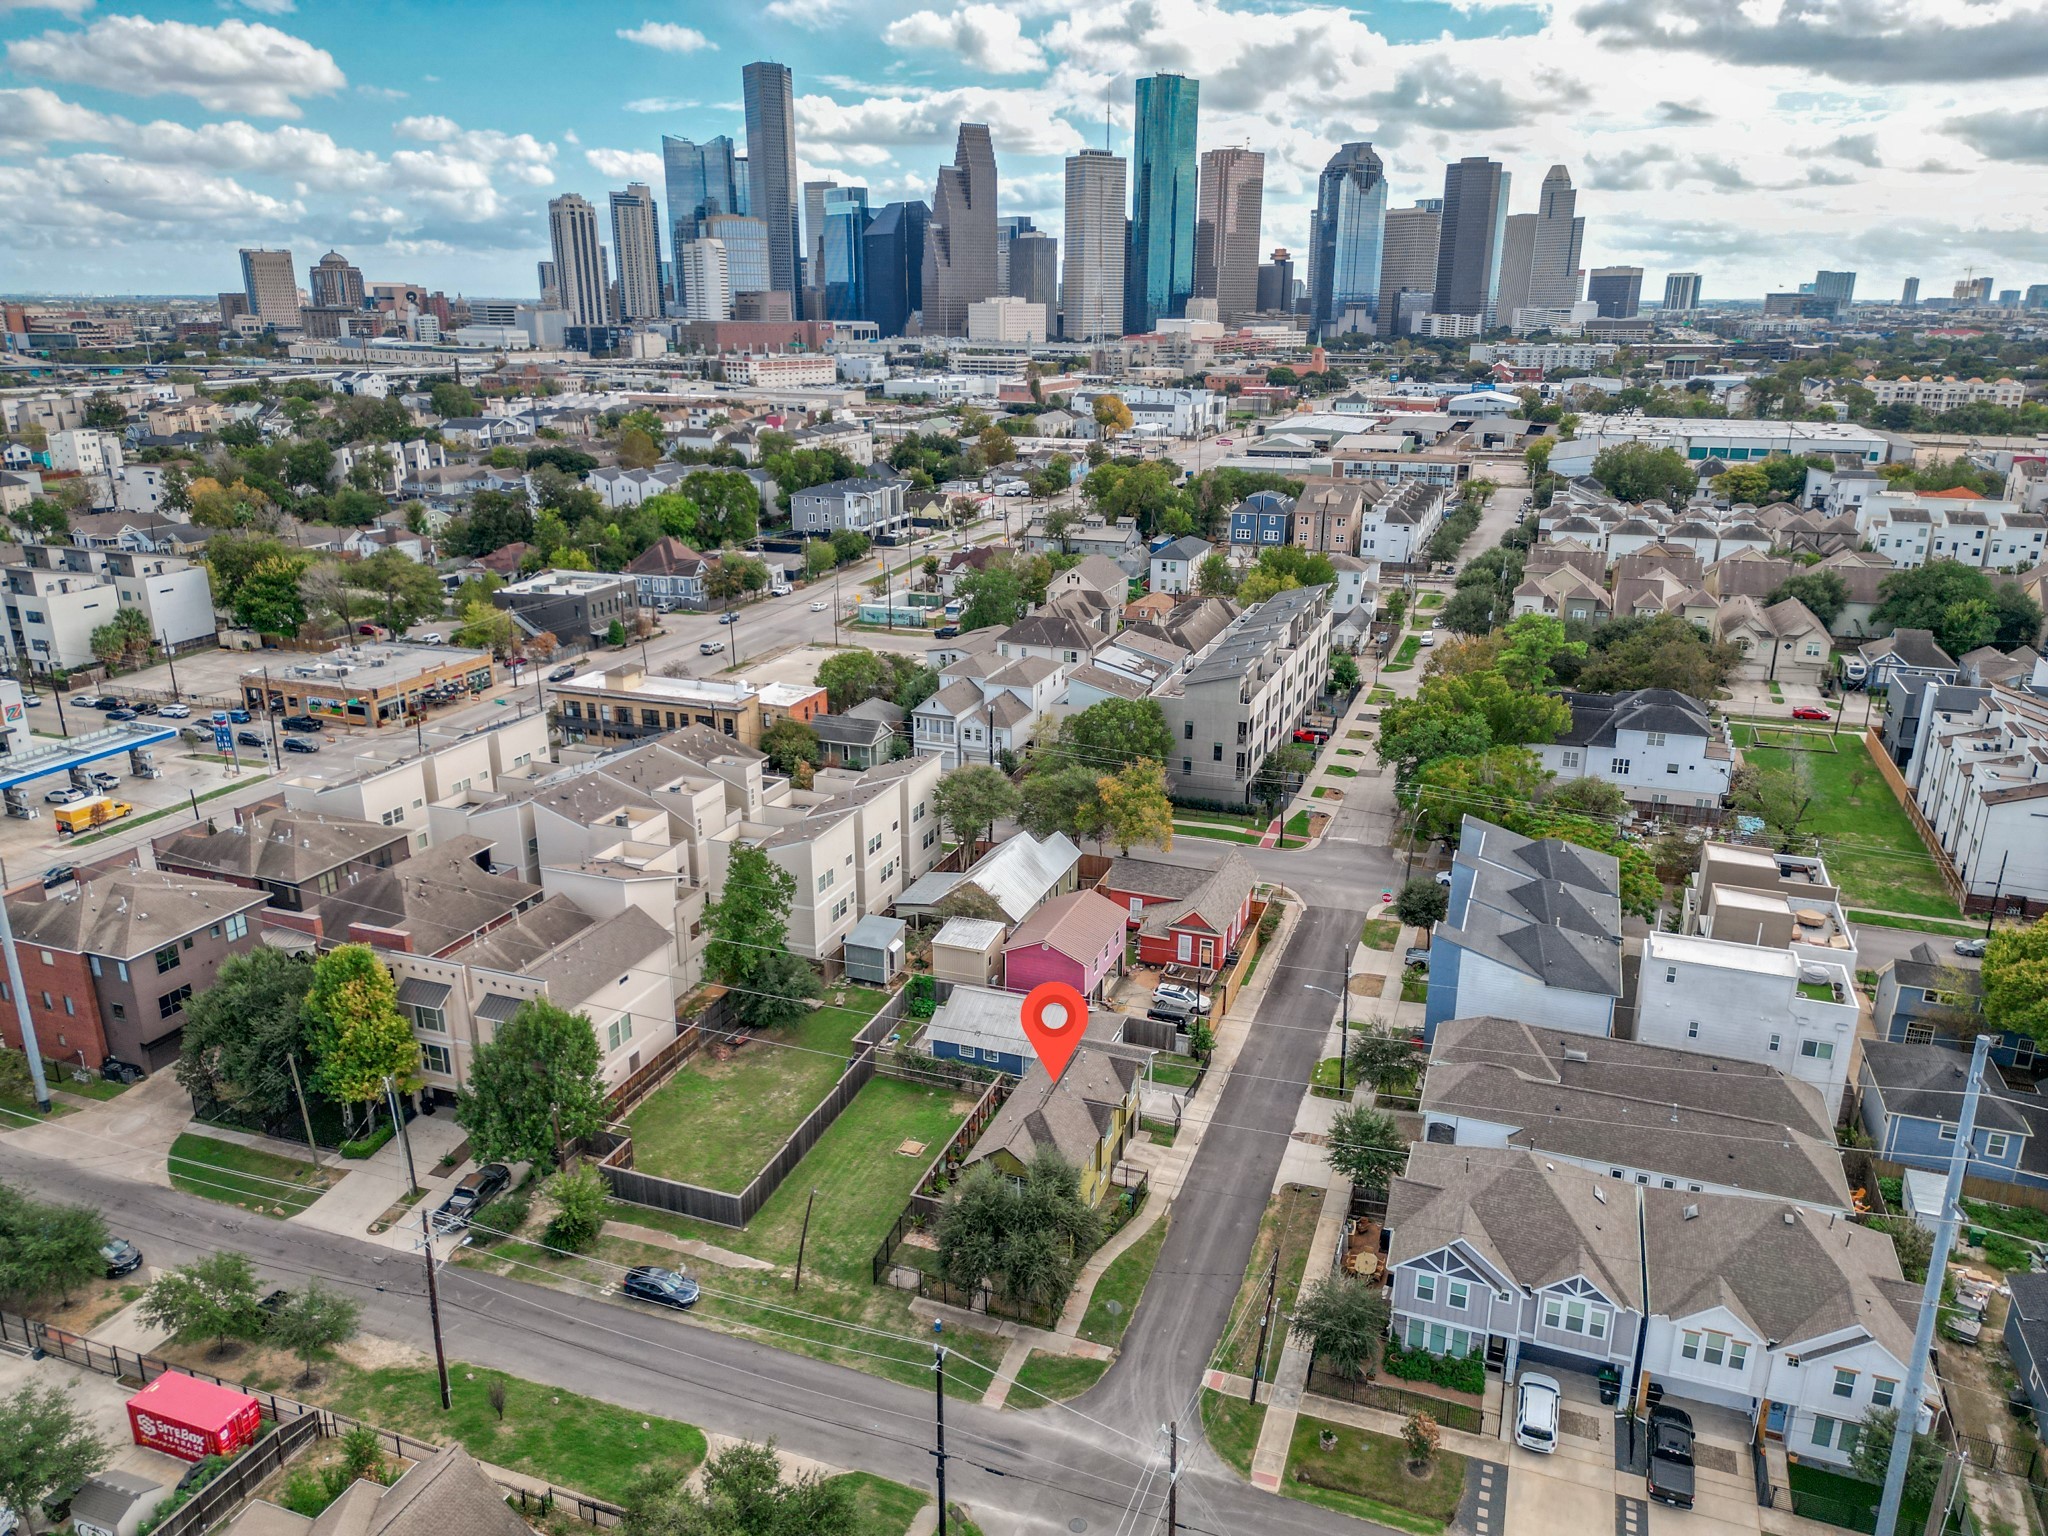 From an aerial perspective, 1521 Shearn's location is notable, with downtown visible in the background and coffee shops and restaurants within walking distance, truly a home that offers it all! Call today to schedule a showing!